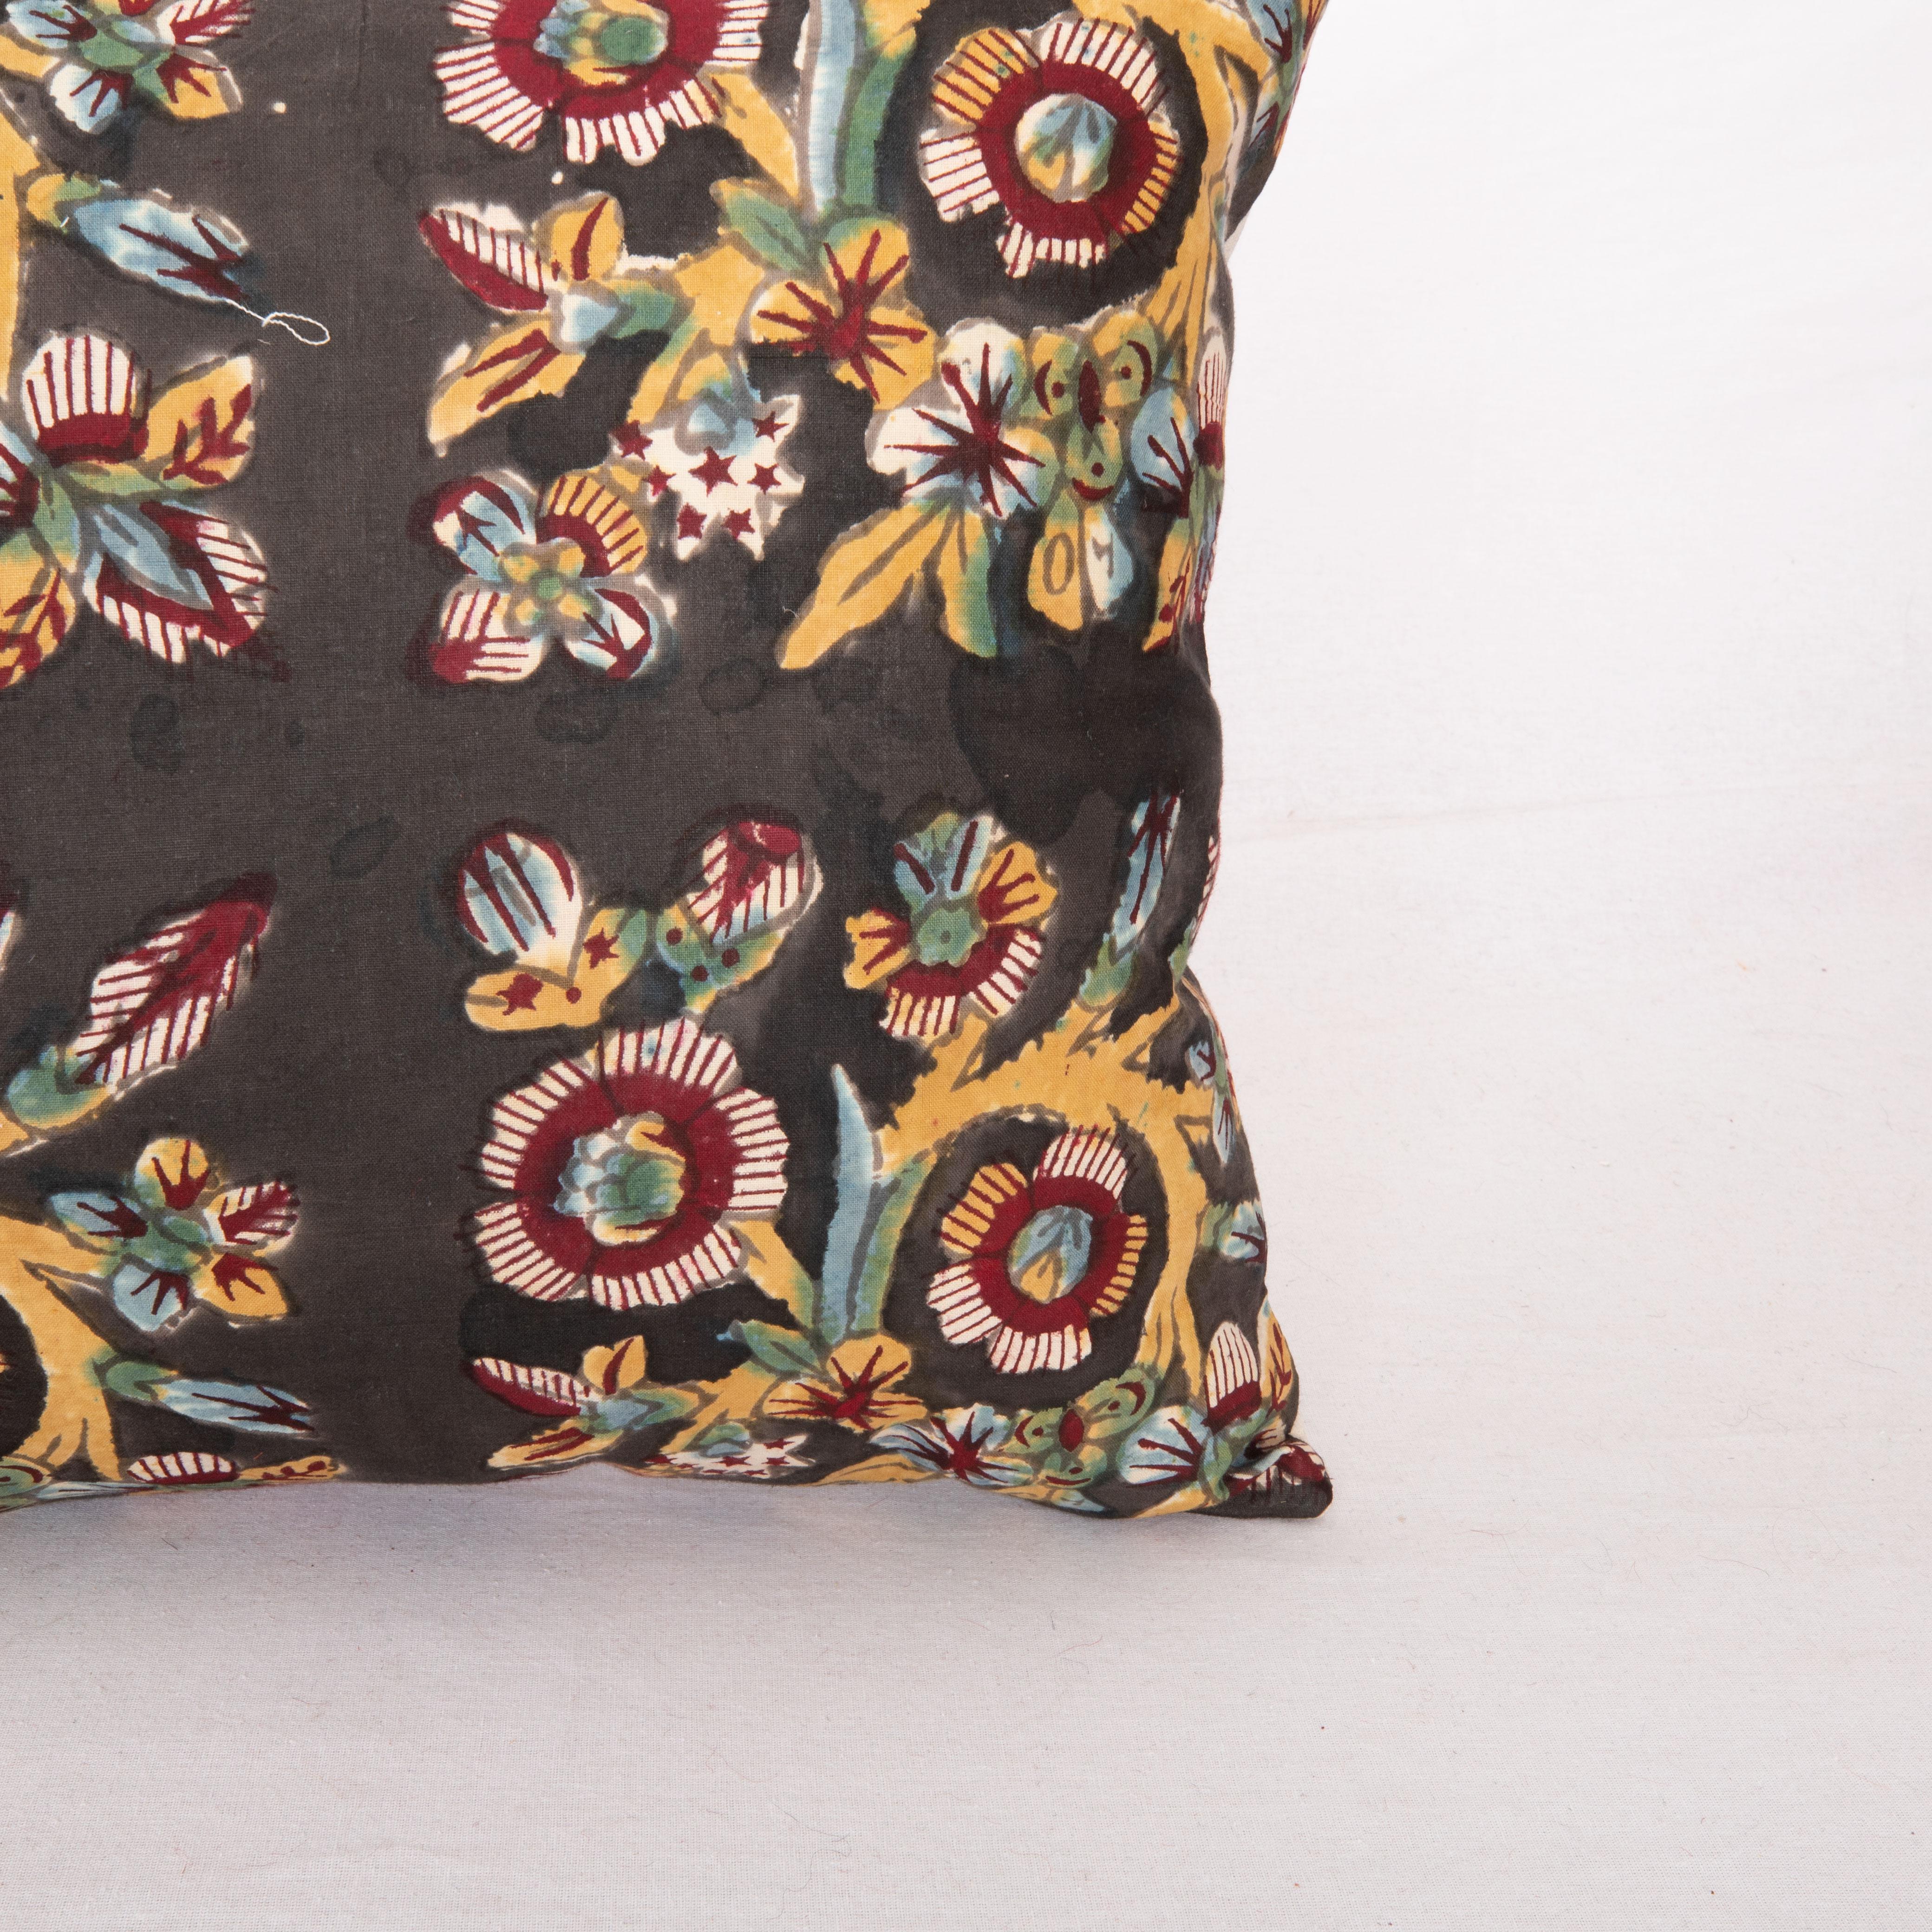 Kalamkari Pillow Cover Made from a Vintage Turkish Block Printed Panel For Sale